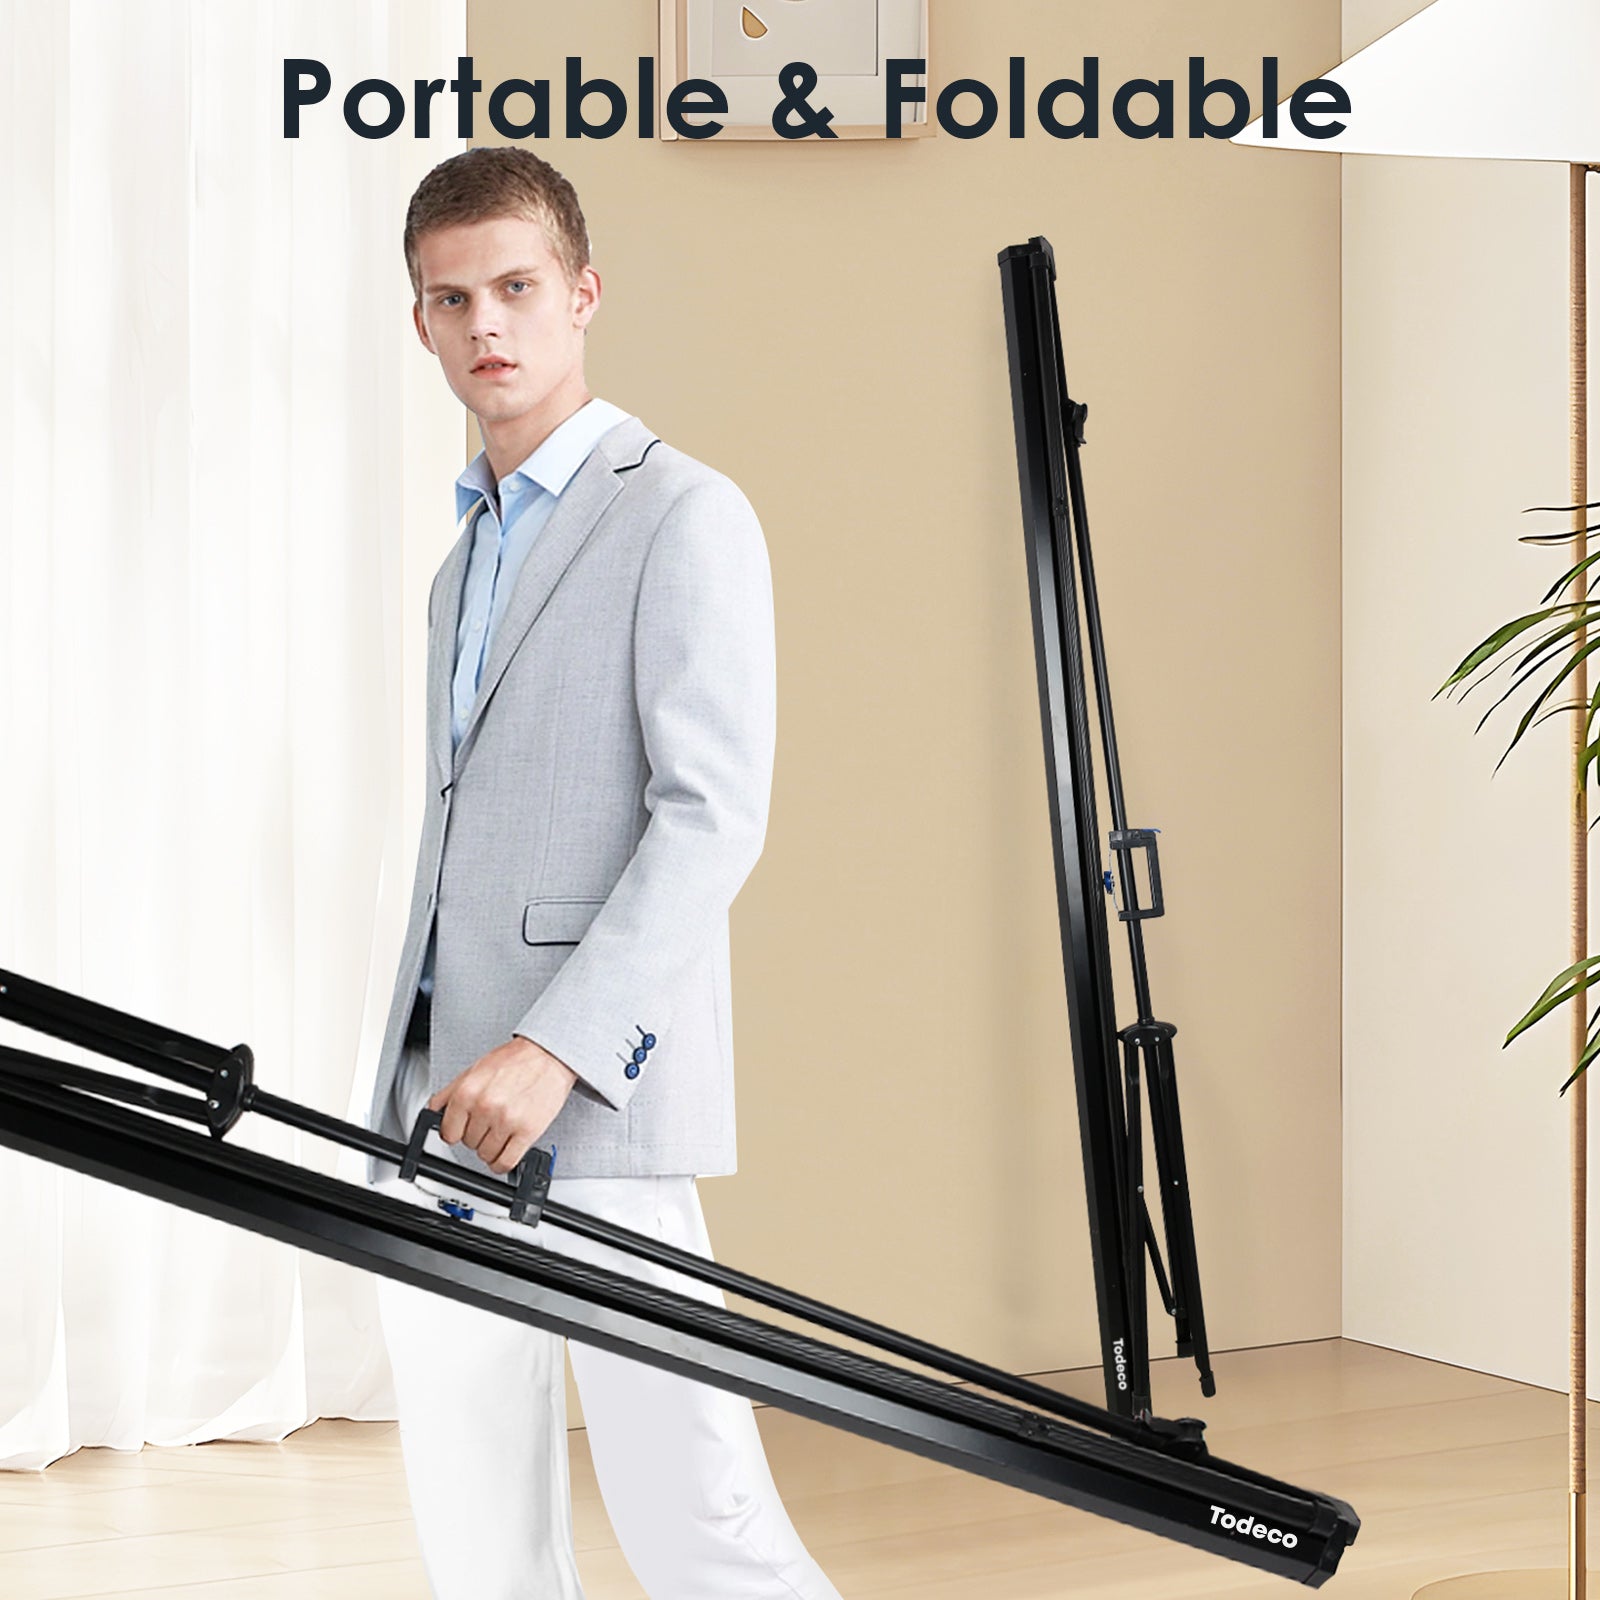 60-Inch-Floor-Standing-Projection-Screen-Foldable-Portable-Projector-Screen-with-Tripod-for-Indoor-or-Outdoor-Use-130-x-75-cm-16-9-Formats-HD-4K-3D-Black-60-Inch-Floor-Standing-Projection-Screen-Black